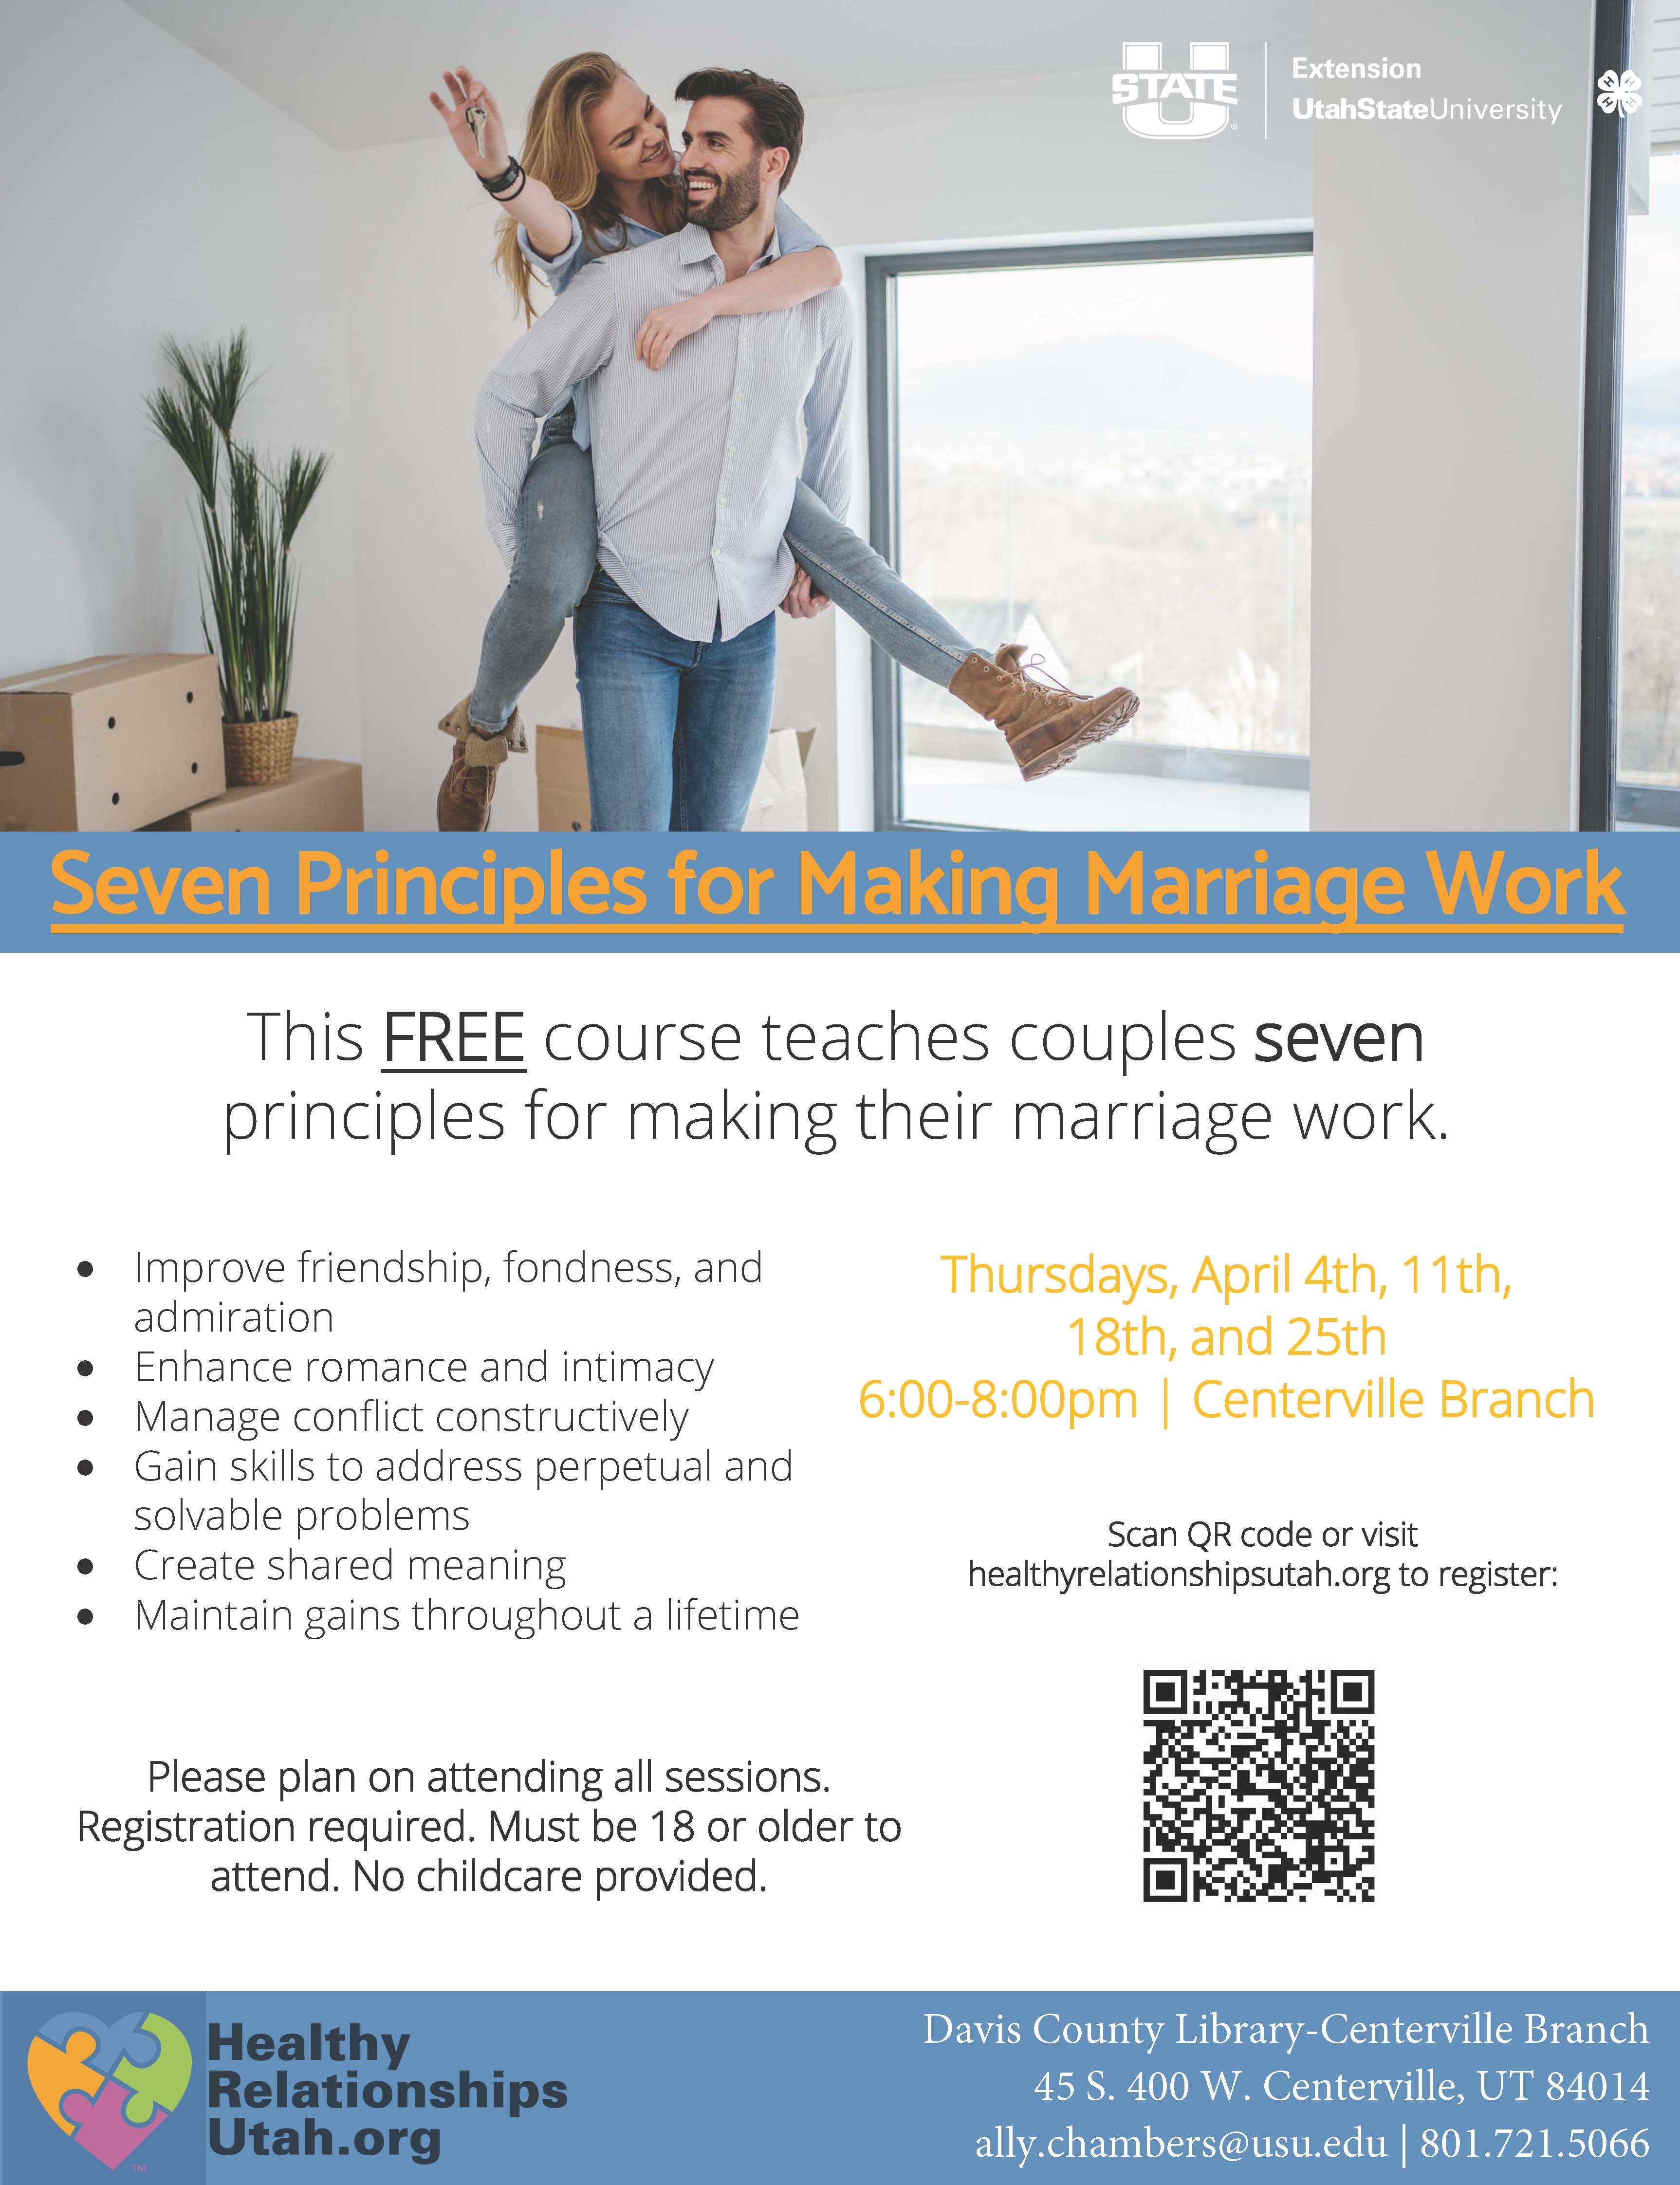 Seven Principles of Making Marriage Work at the Centerville Library, Thursdays in April from 6-8 pm. Register at https://extension.usu.edu/hru/courses/seven-principles-for-making-marriage-work. Must be 18 years or older